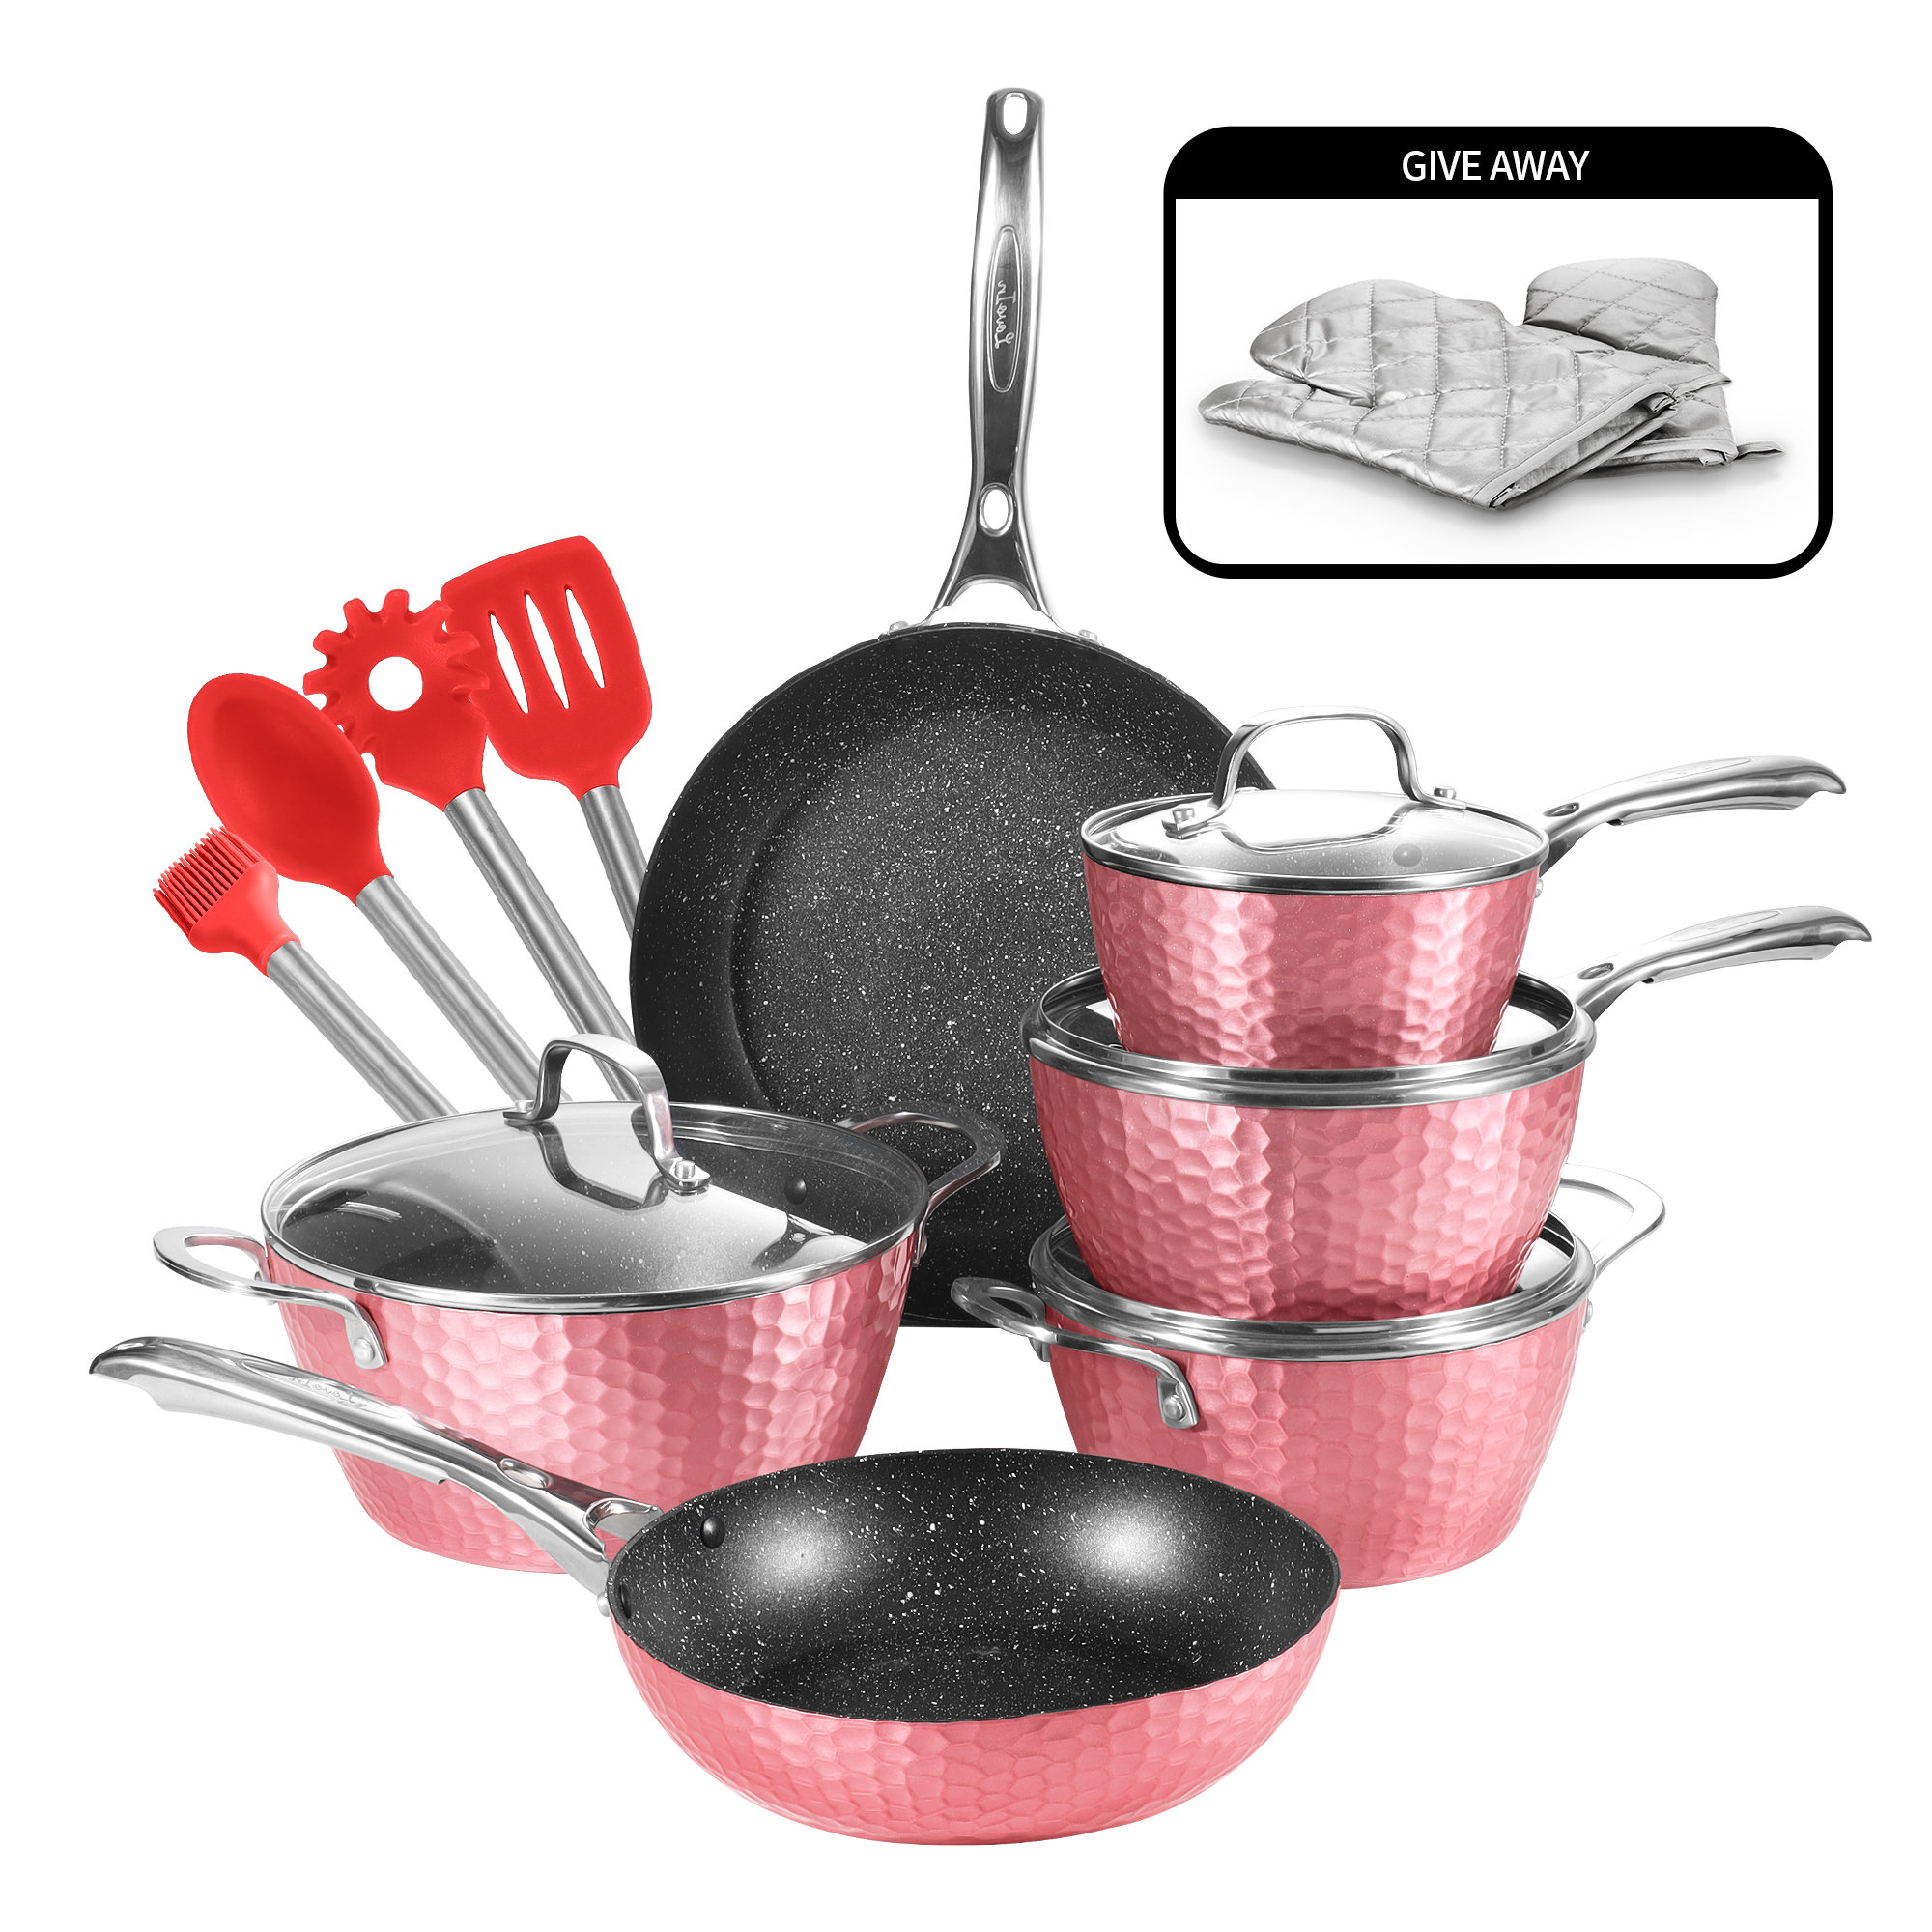 Stylish Hammered Finish Nonstick 15 Pieces Cookware Gift Set